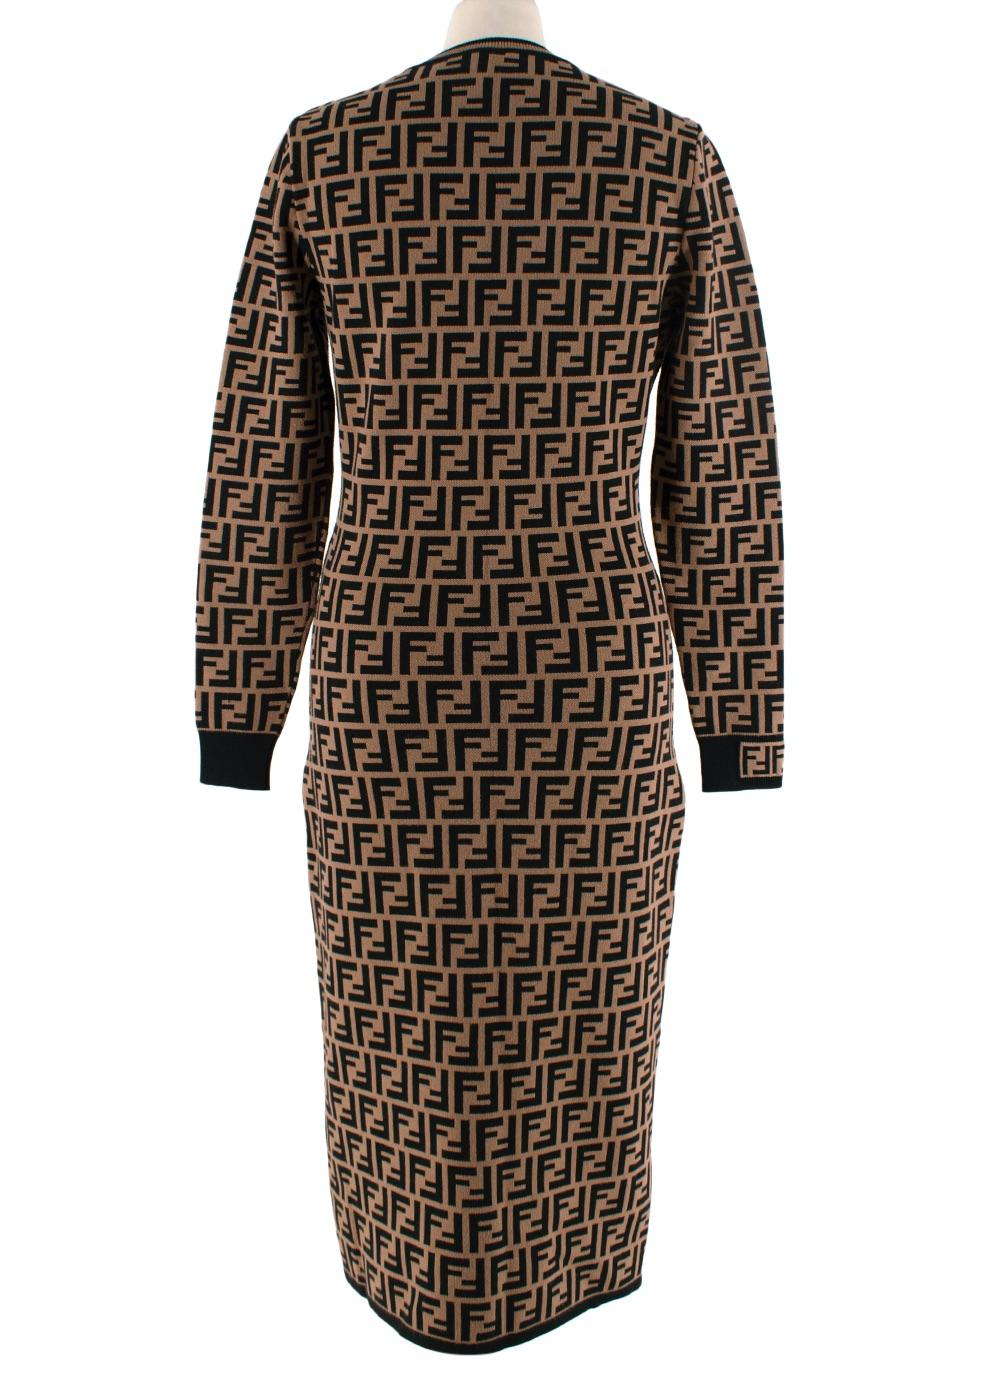 Brown & Black FF Monogram Jacquard Knit Dress In New Condition For Sale In London, GB